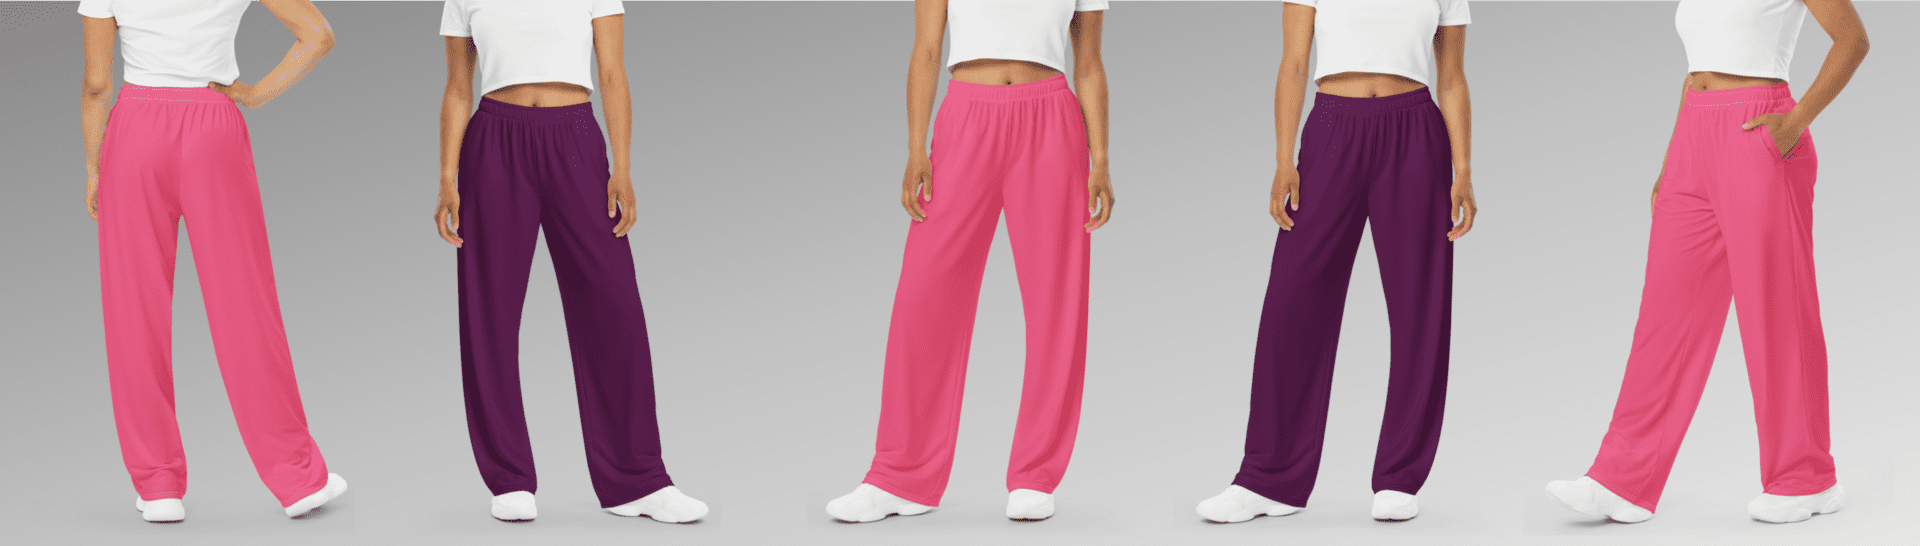 Four women wearing pink and purple pants.